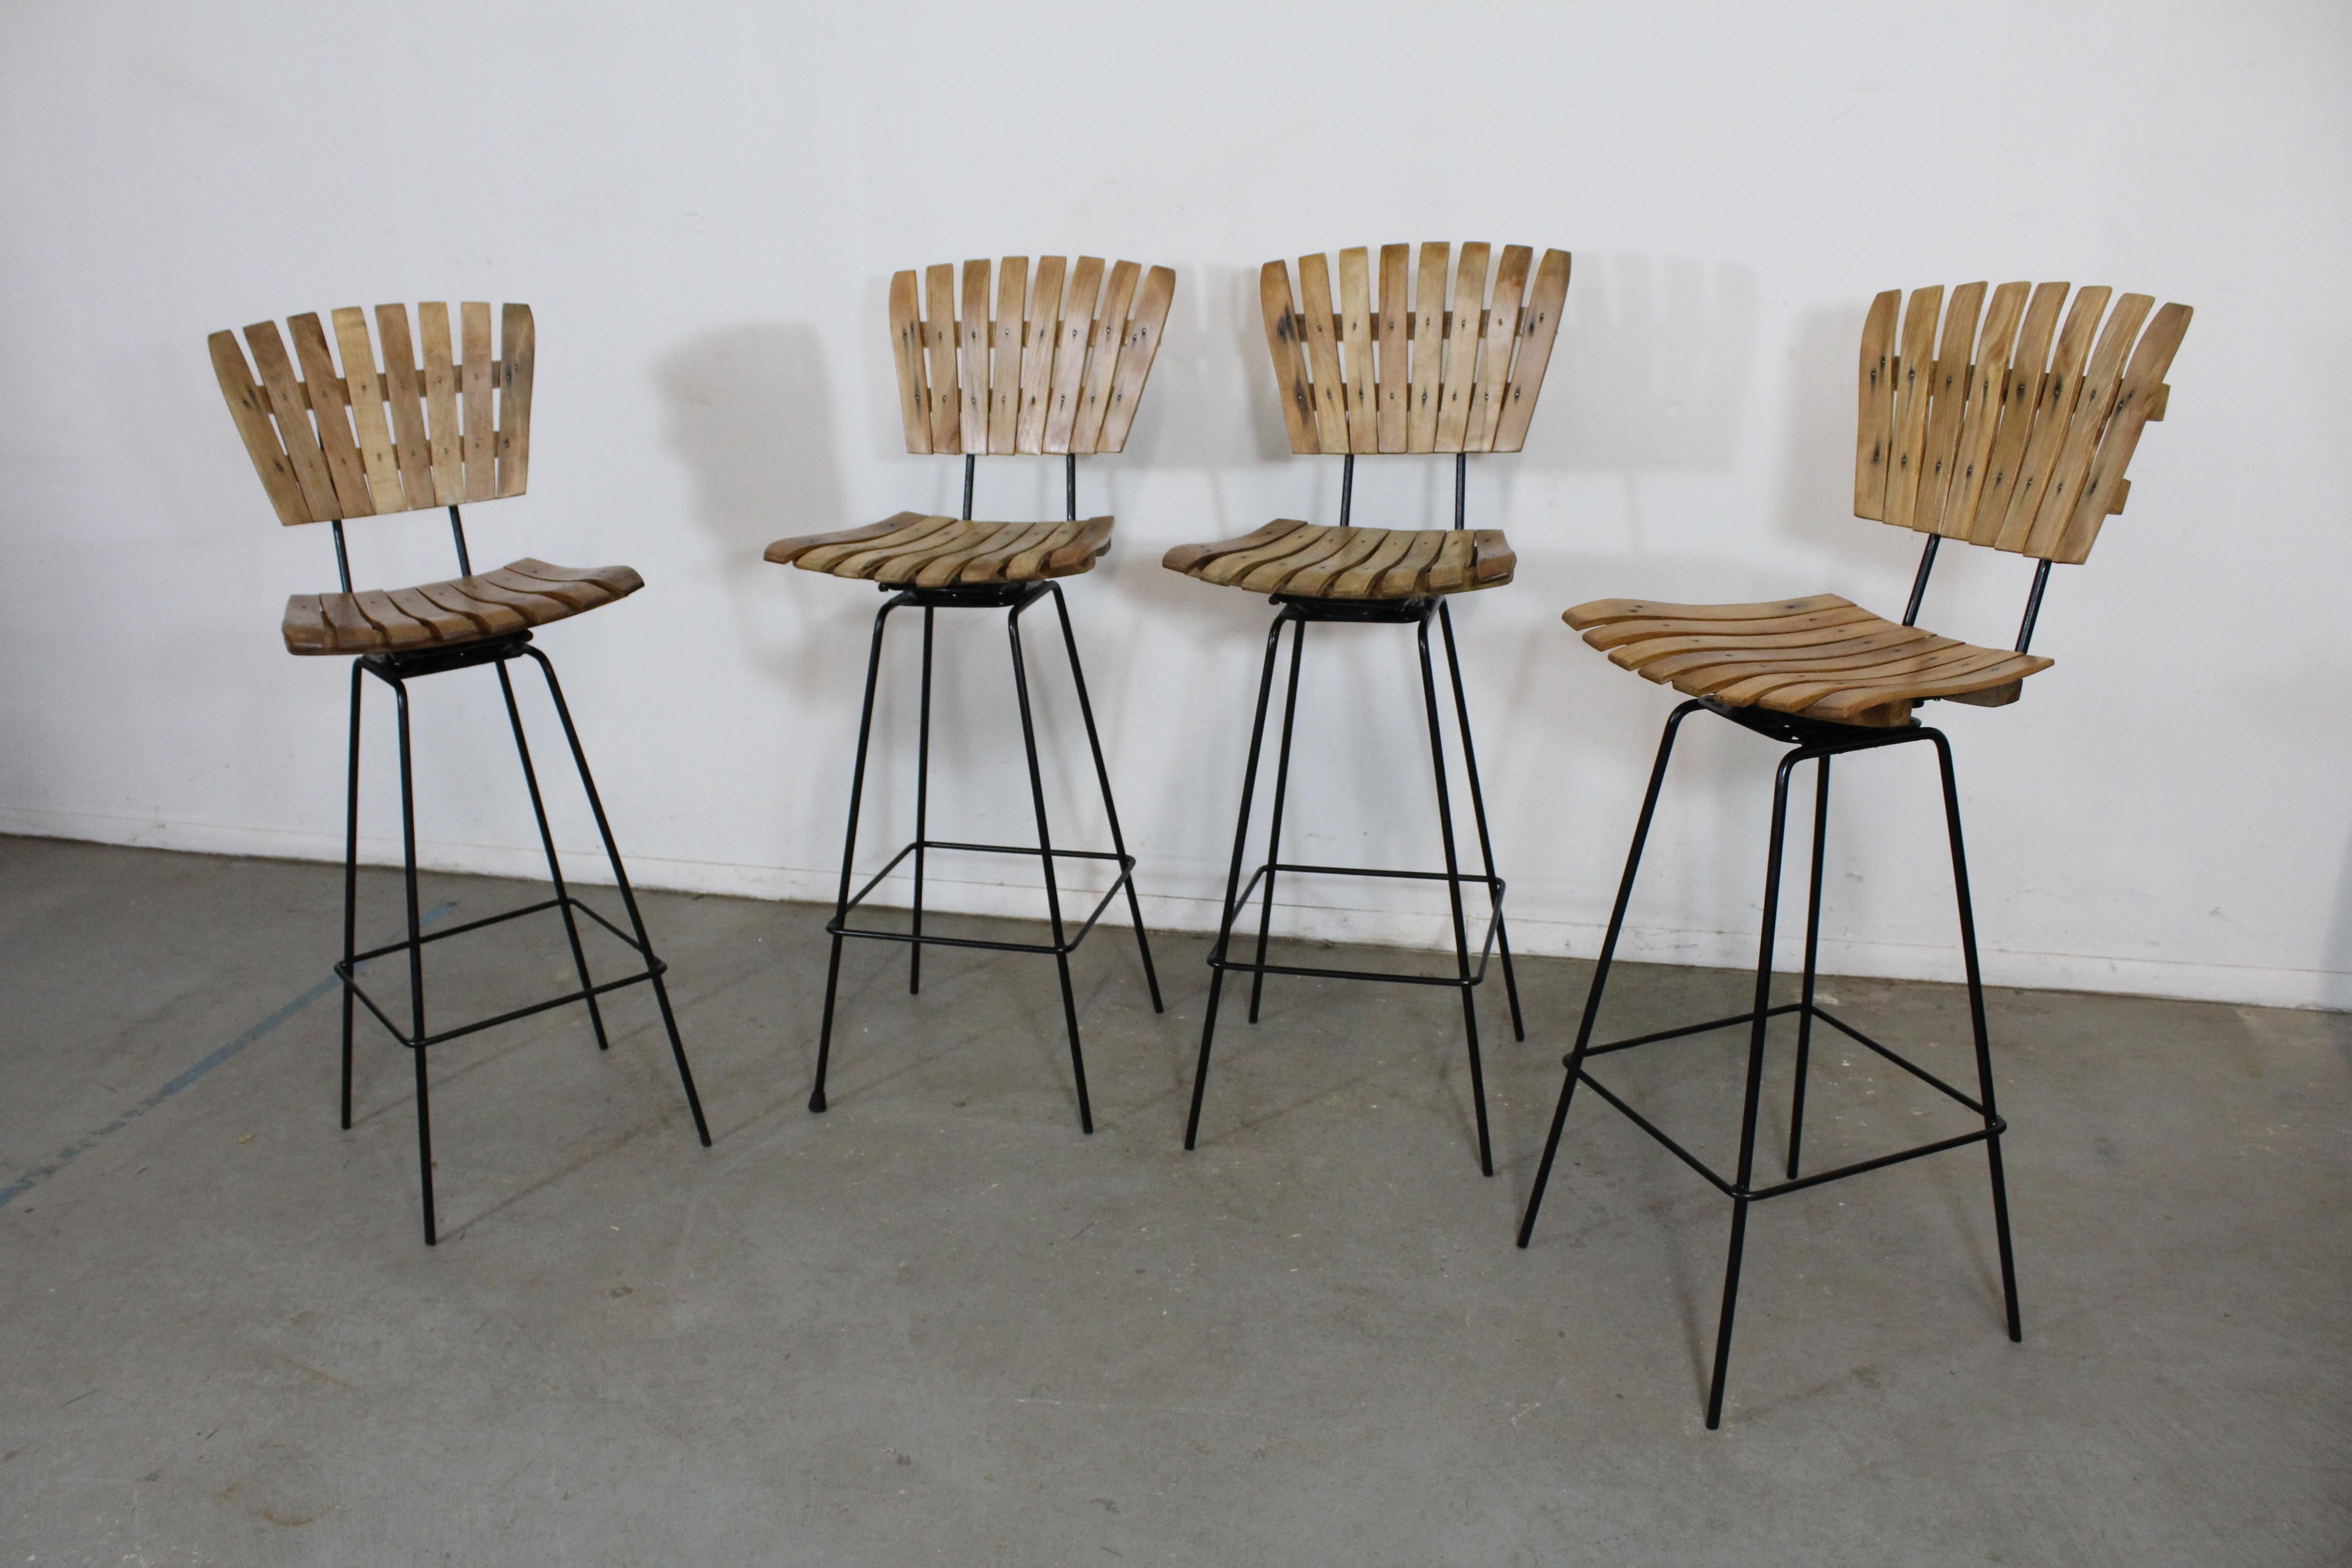 Set of 4 mid-century Arthur Umanoff slat style bar stools

Offered is a great set of 4 mid-century Arthur Umanoff slat style bar stools. They have the simple lines and design seen in this time period. They are in good condition for their age